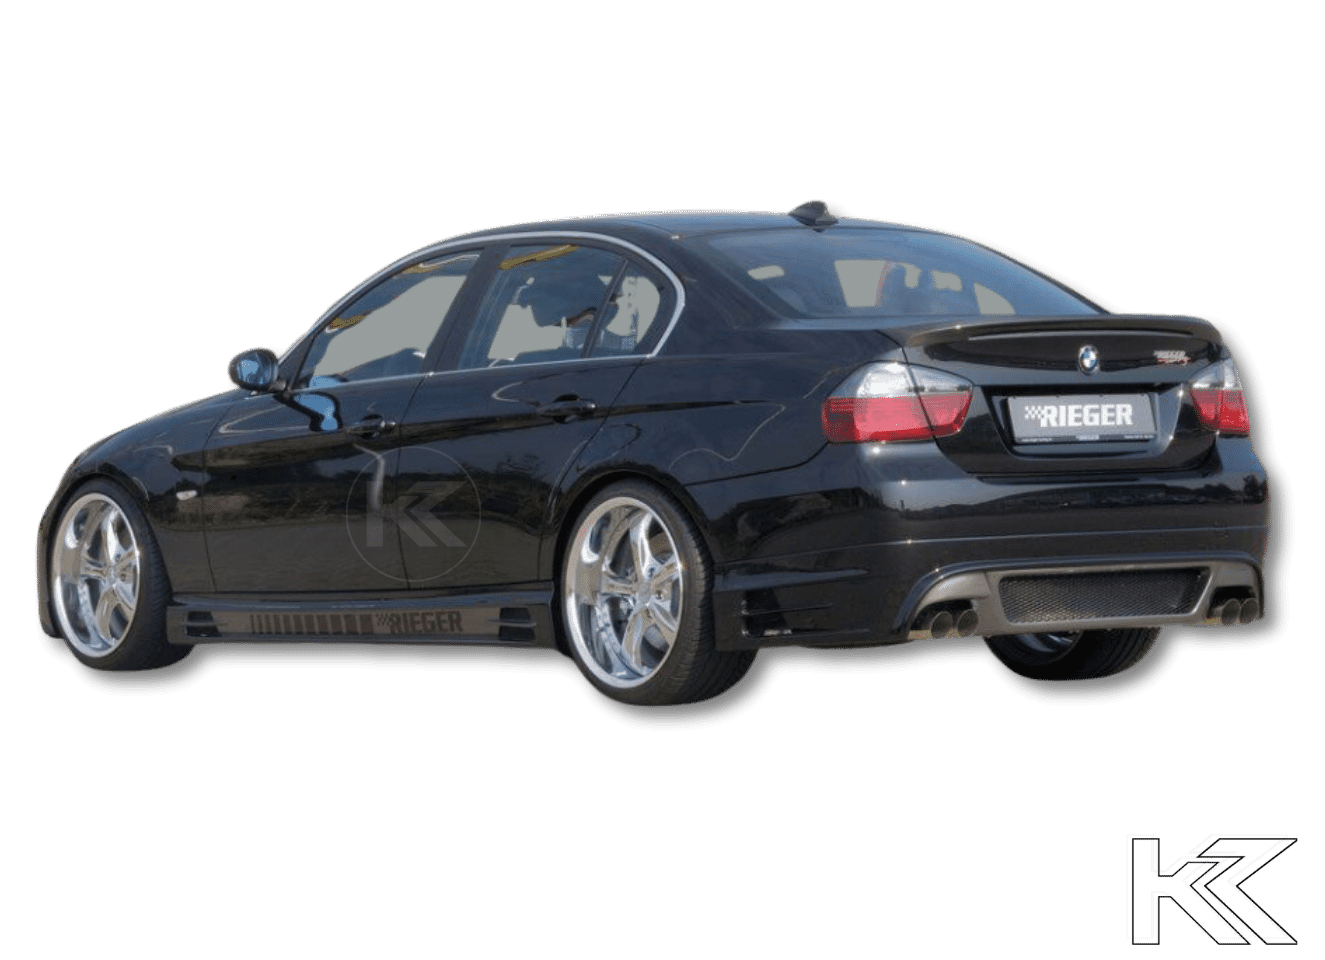 Rieger E90/91 Side Skirts - Vented Type 1 - K2 Industries